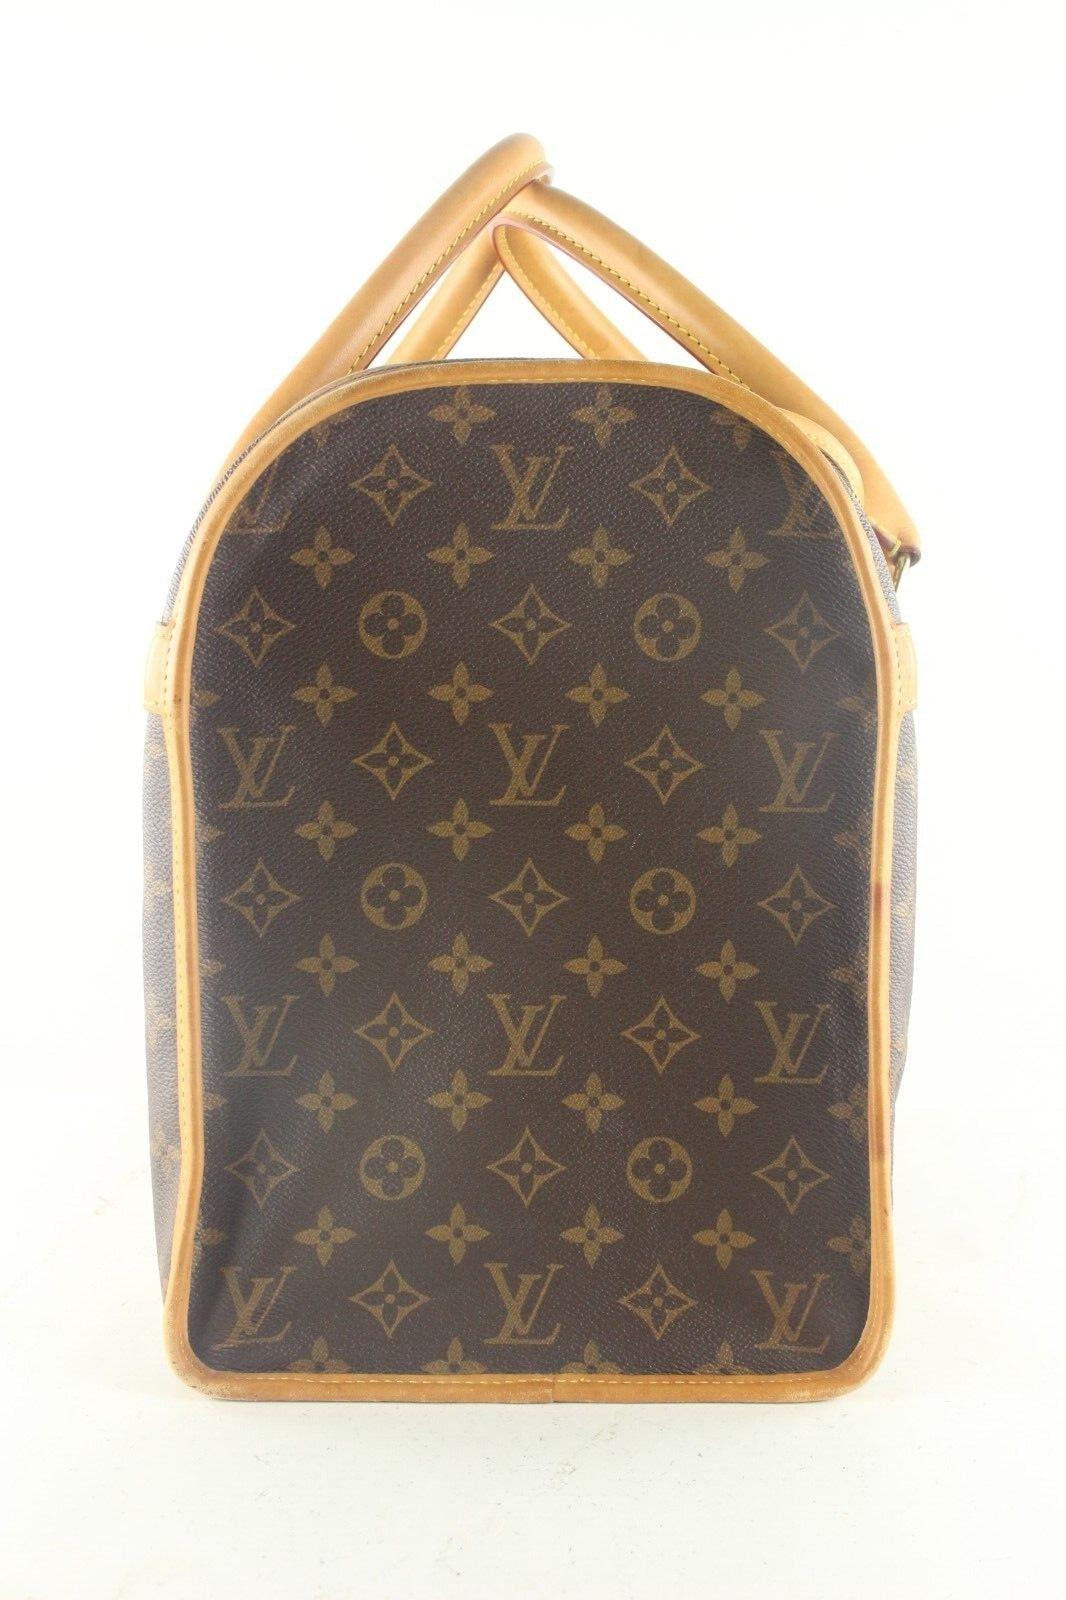 Louis Vuitton Monogram Canvas Sac Chien 40 Pet Carrier 1LV920K In Fair Condition For Sale In Dix hills, NY